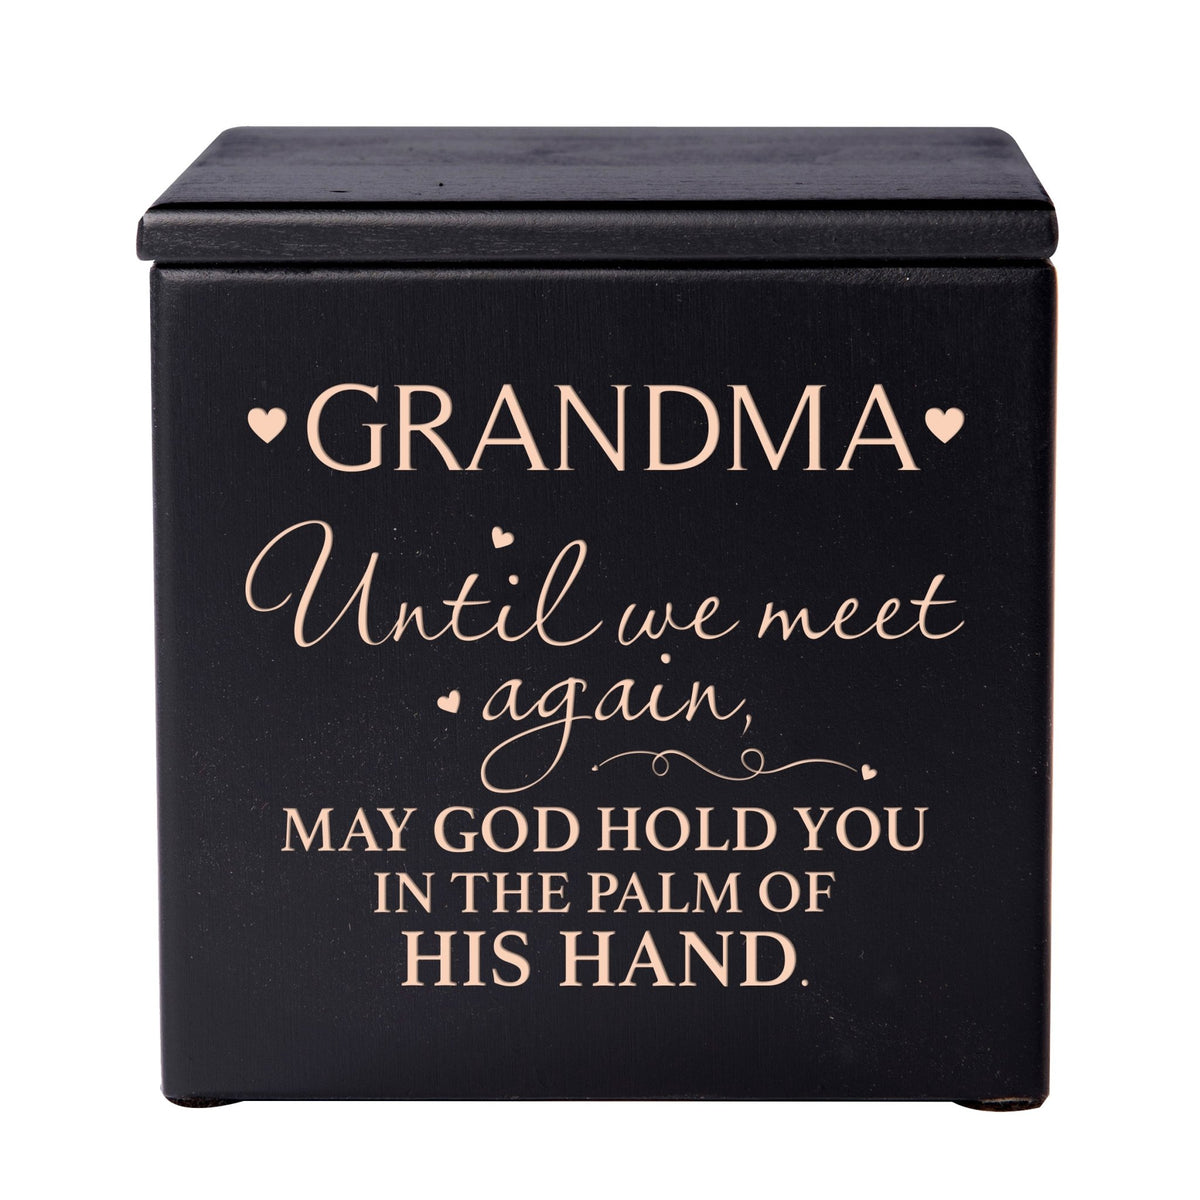 Modern Inspirational Memorial Wooden Cremation Urn Box 4.5x4.5in Holds 49 Cu Inches Of Human Ashes (Until We Meet Again Grandma) Funeral and Commemorative Keepsake - LifeSong Milestones